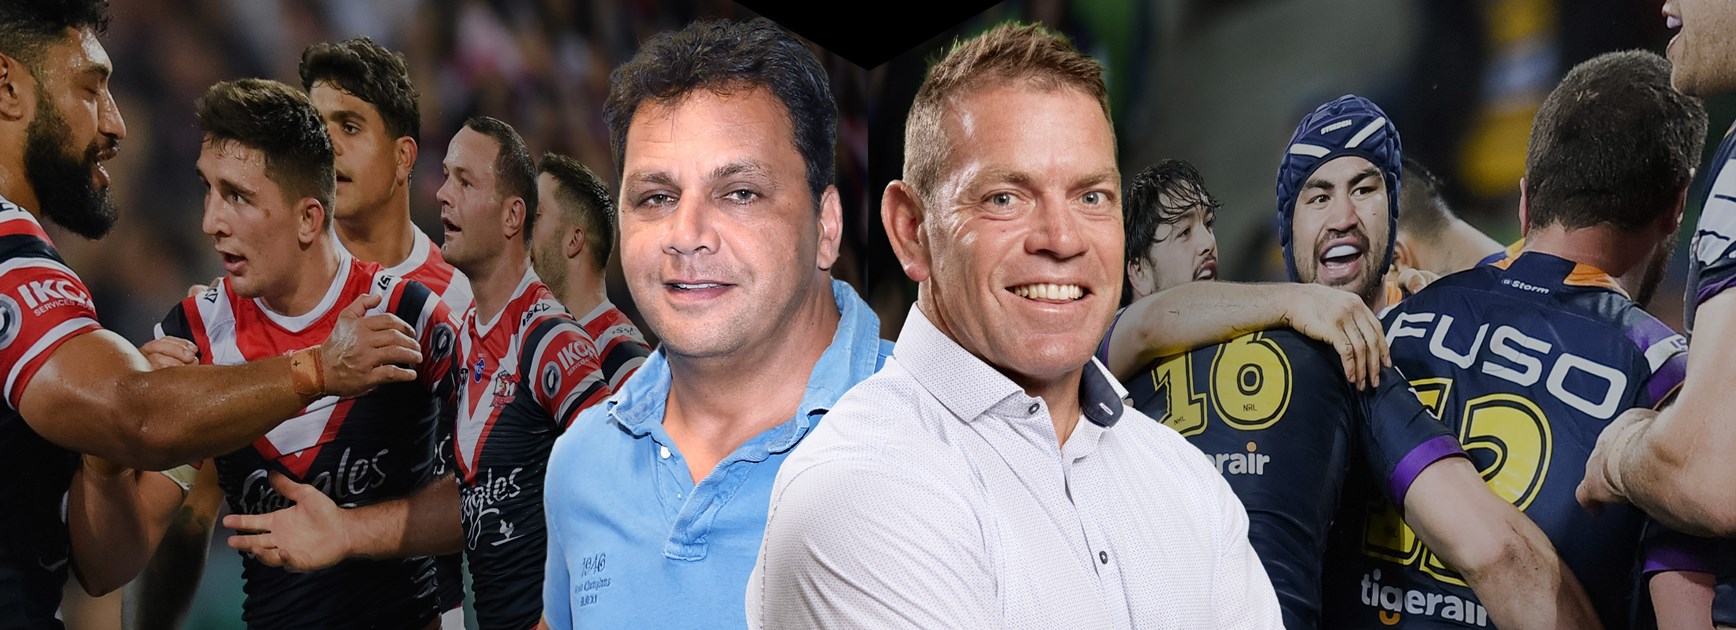 Roosters v Storm: Guest coaches Kimmorley and Renouf go head to head